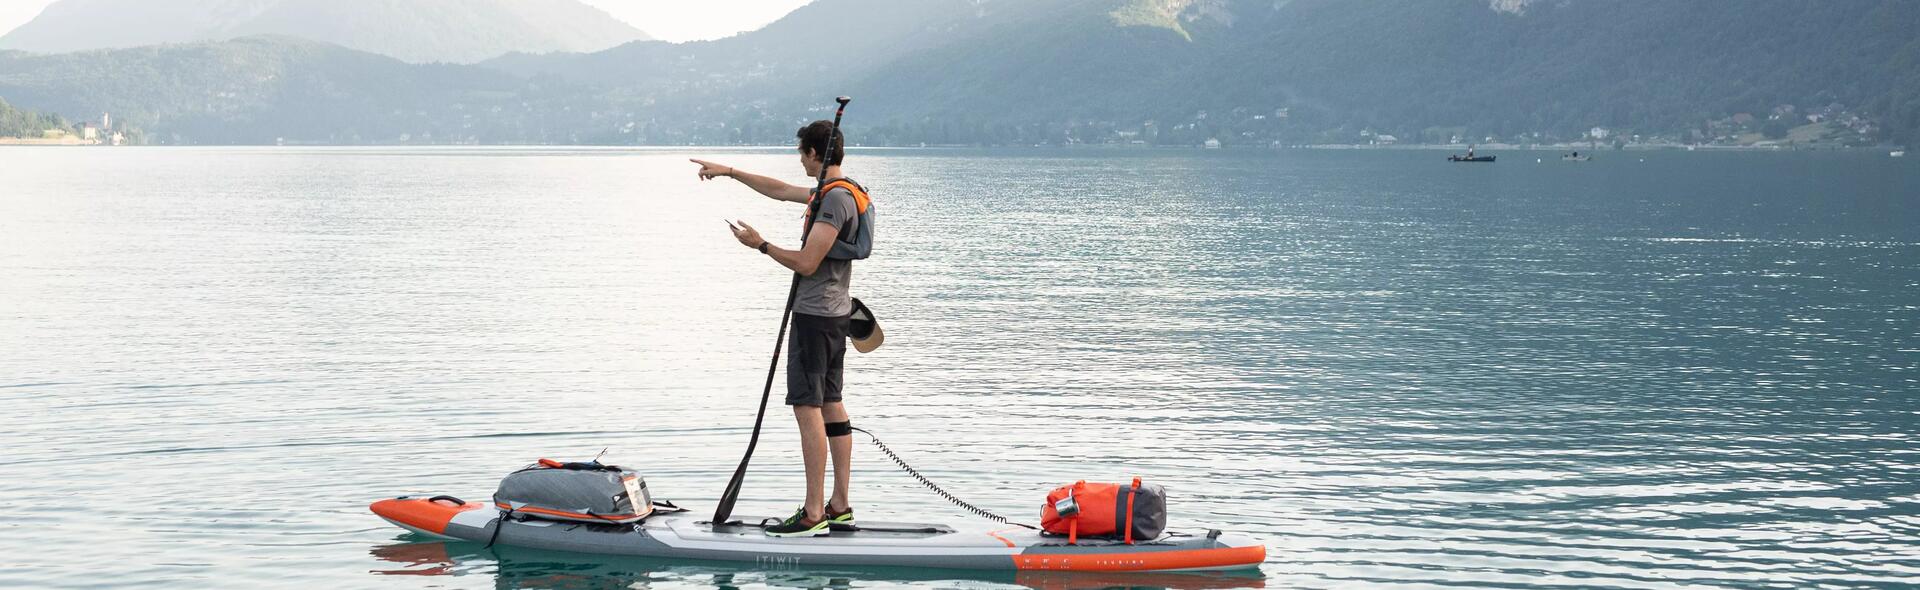 STAND-UP PADDLE GONFLABLES | DECATHLON SAV